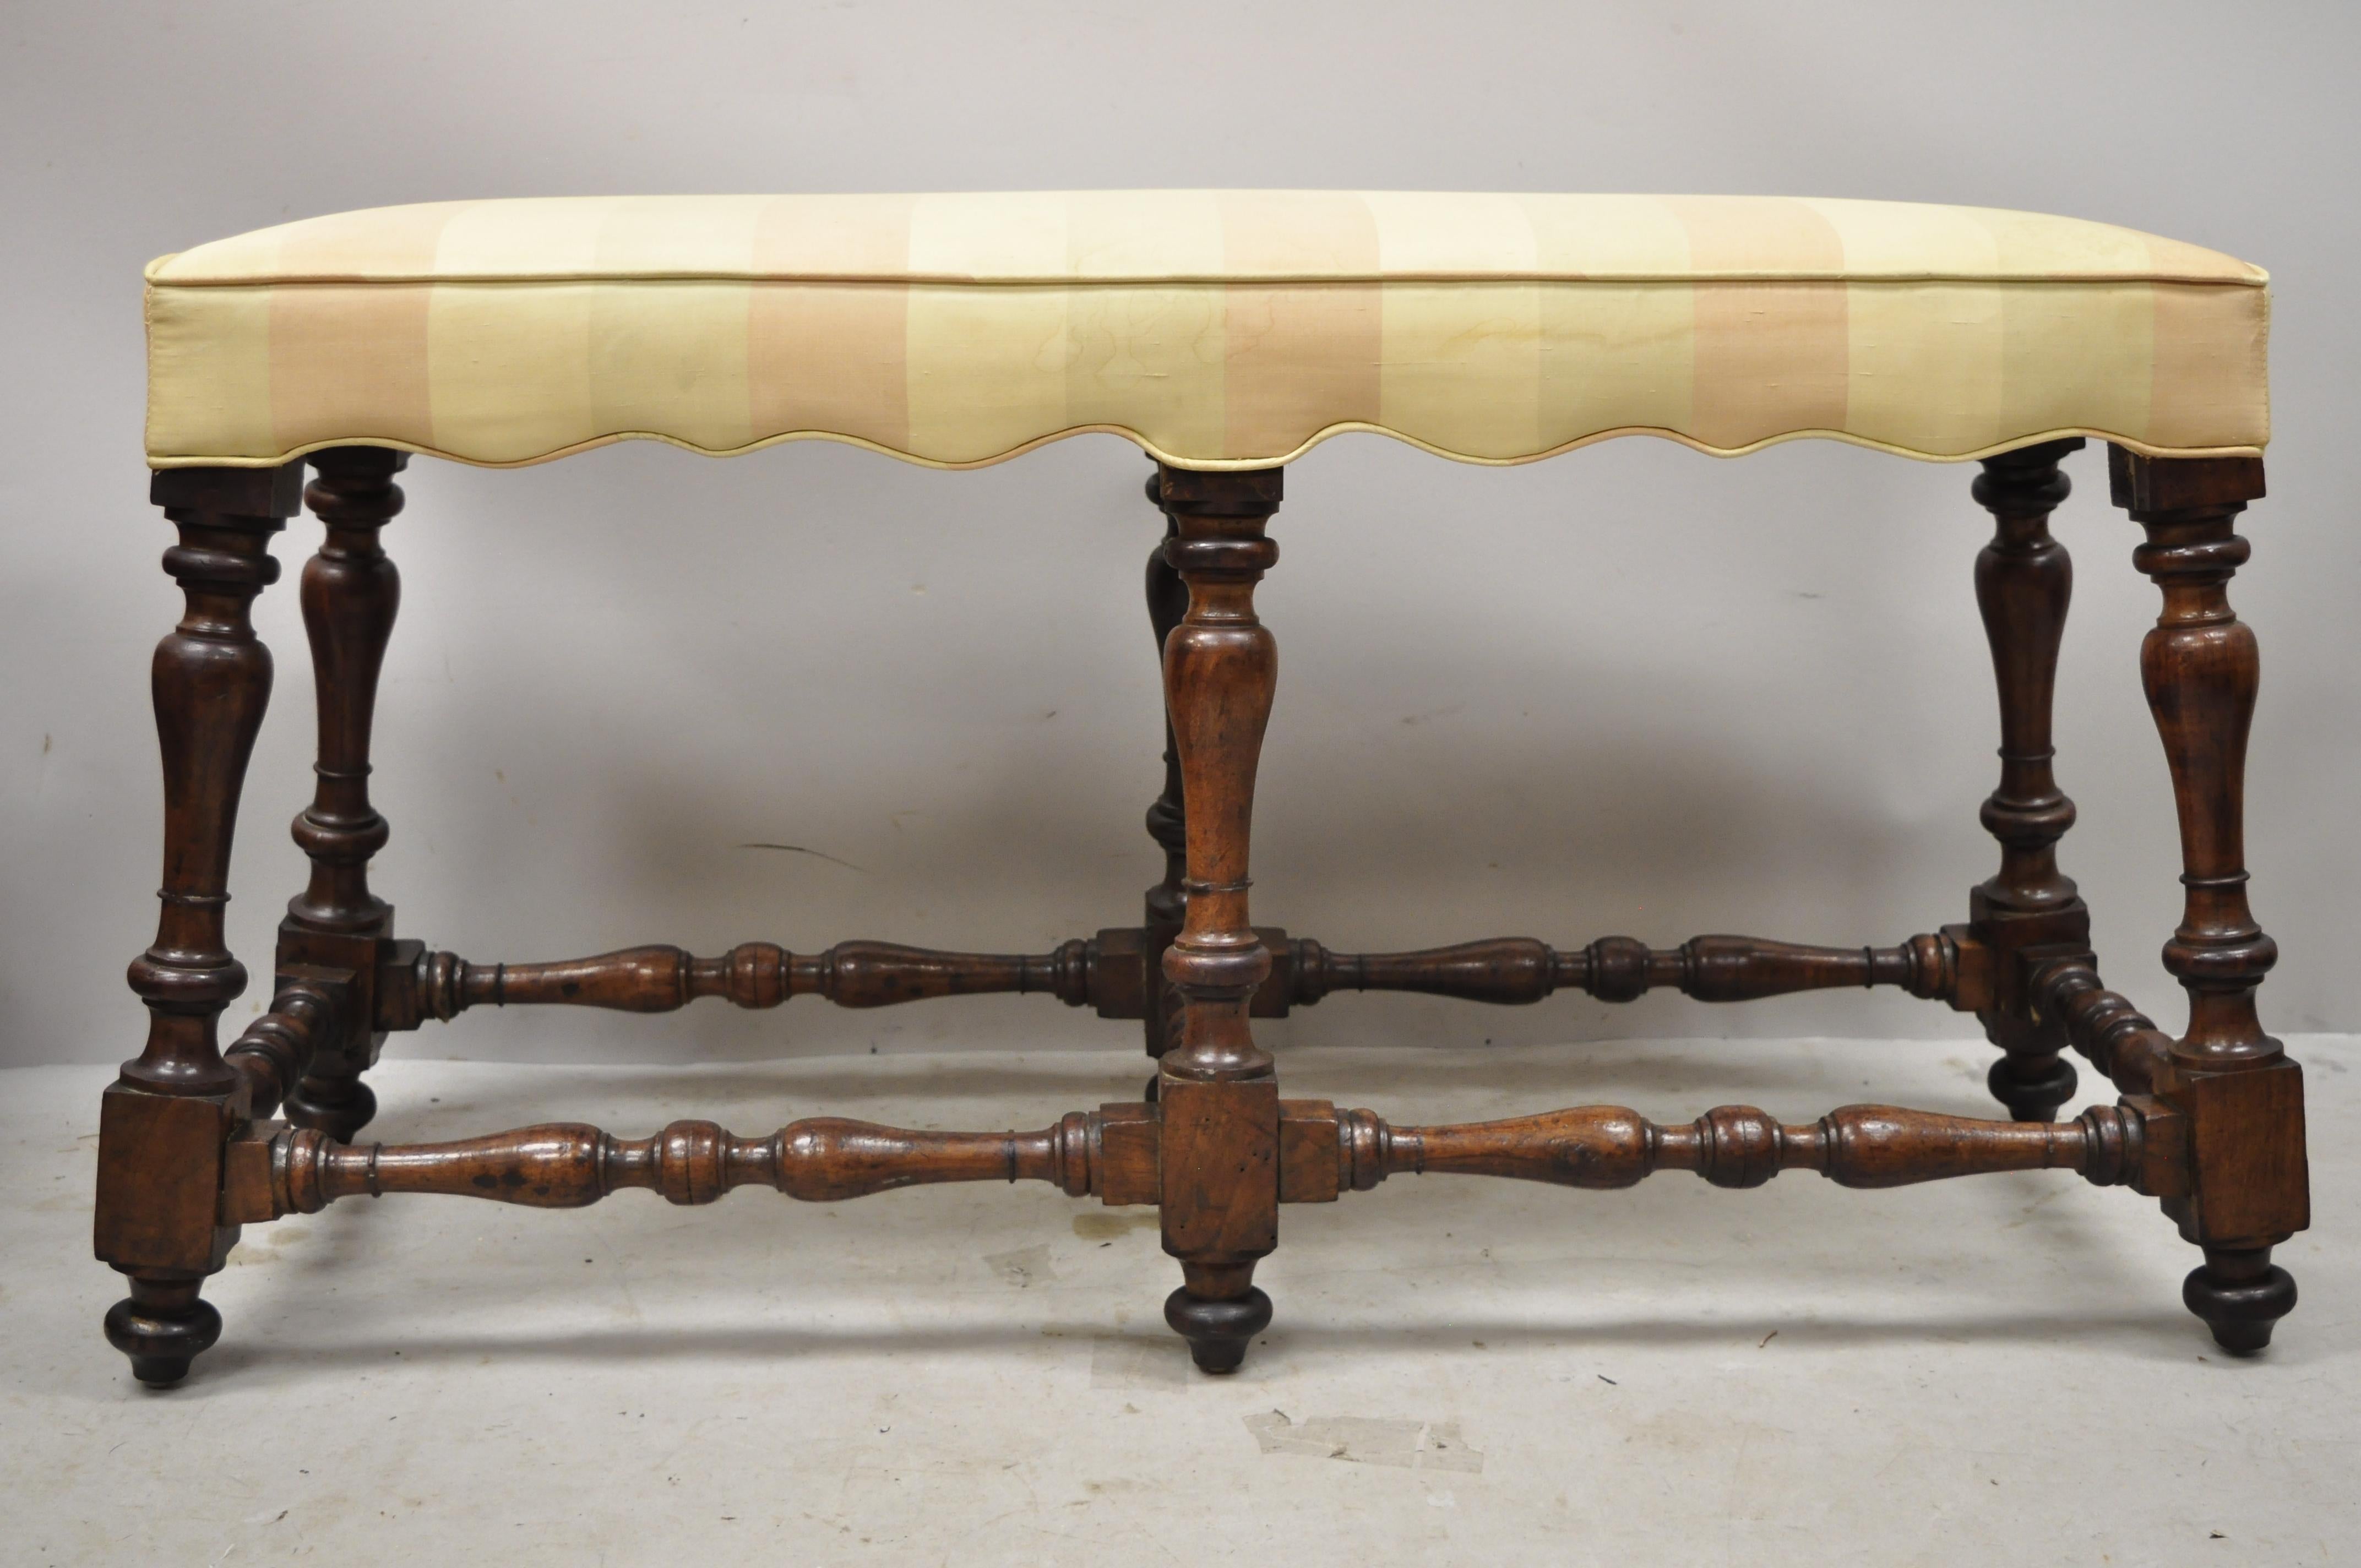 Antique Italian Renaissance Jacobean 6 turn carved walnut legs upholstered bench. Item features solid wood frame, beautiful wood grain, upholstered seat, nicely carved details, very nice antique item, great style and form, circa early 1900s.